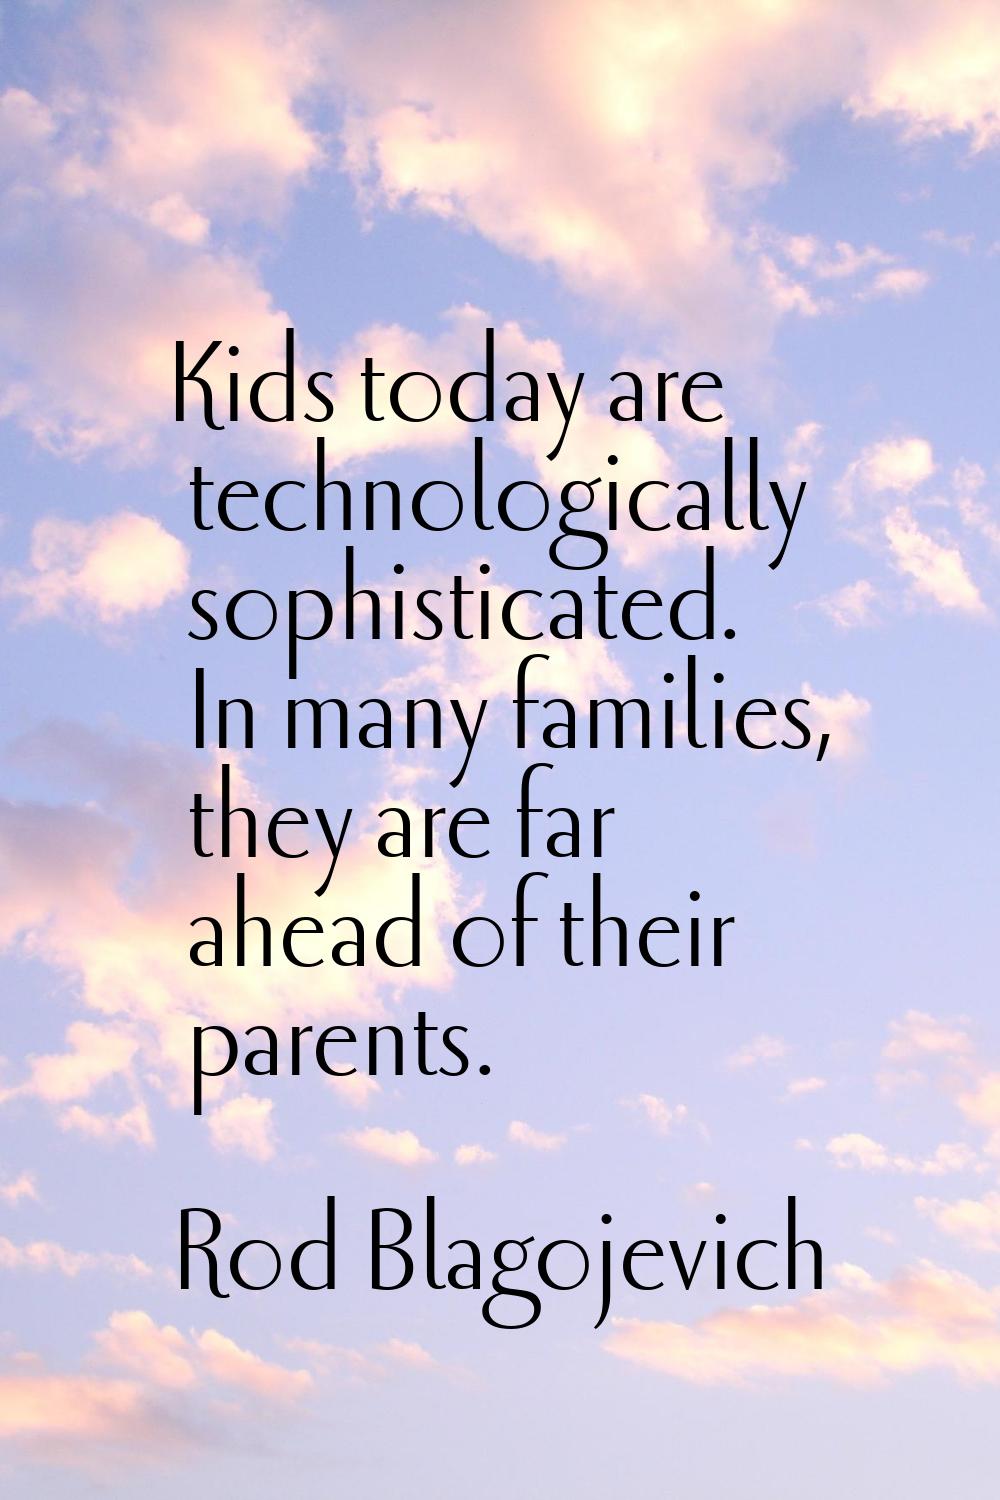 Kids today are technologically sophisticated. In many families, they are far ahead of their parents